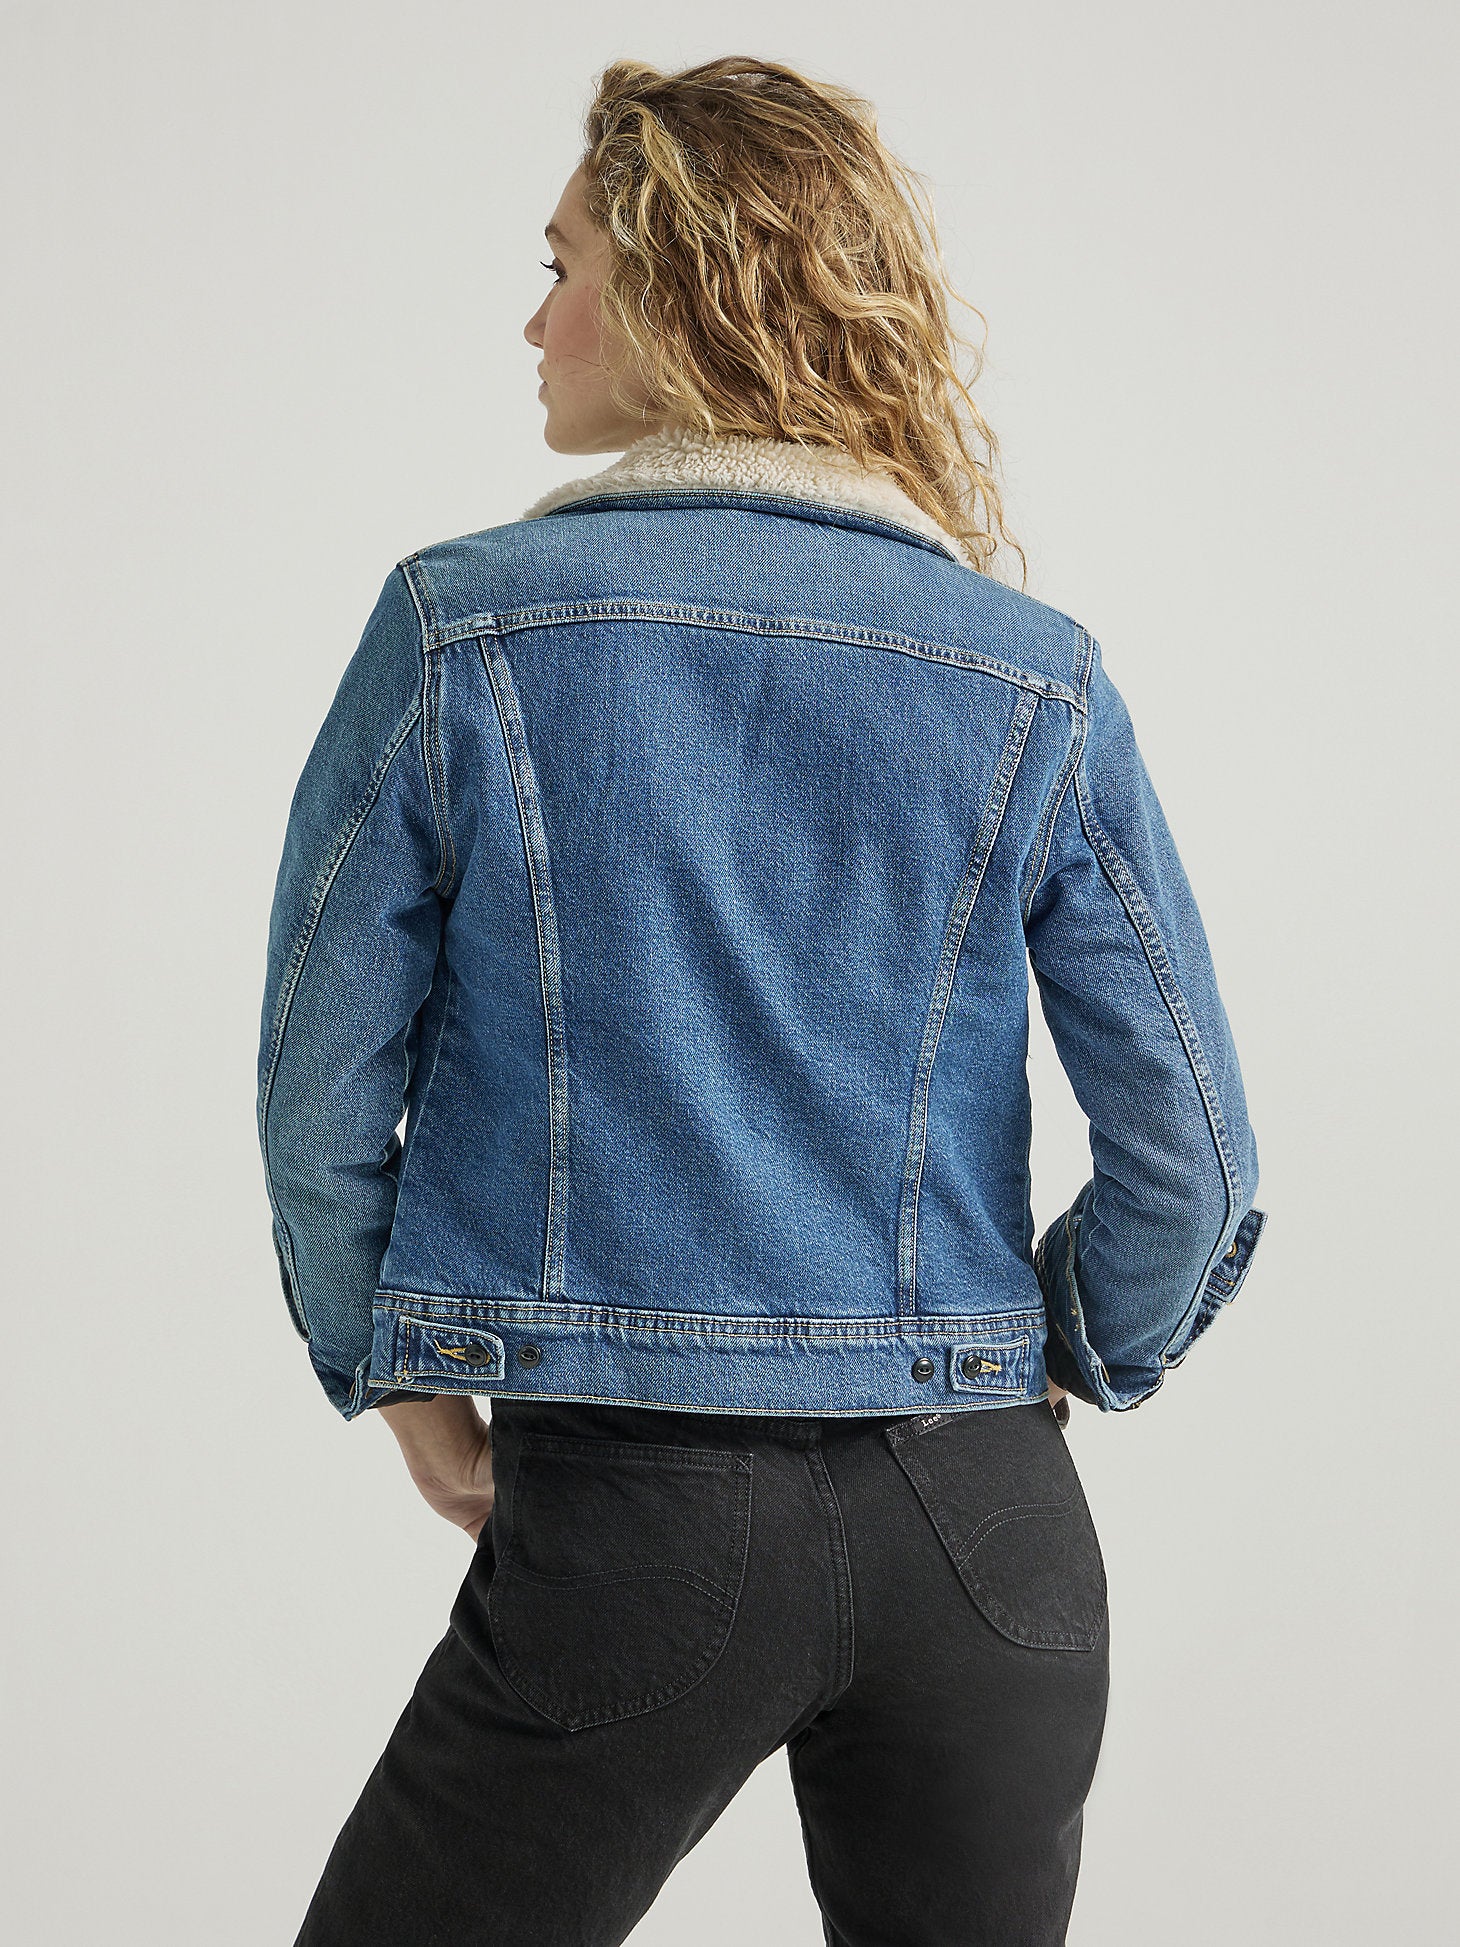 WOMEN'S RIDER SHERPA JACKET IN IN THE THRILL BLUE